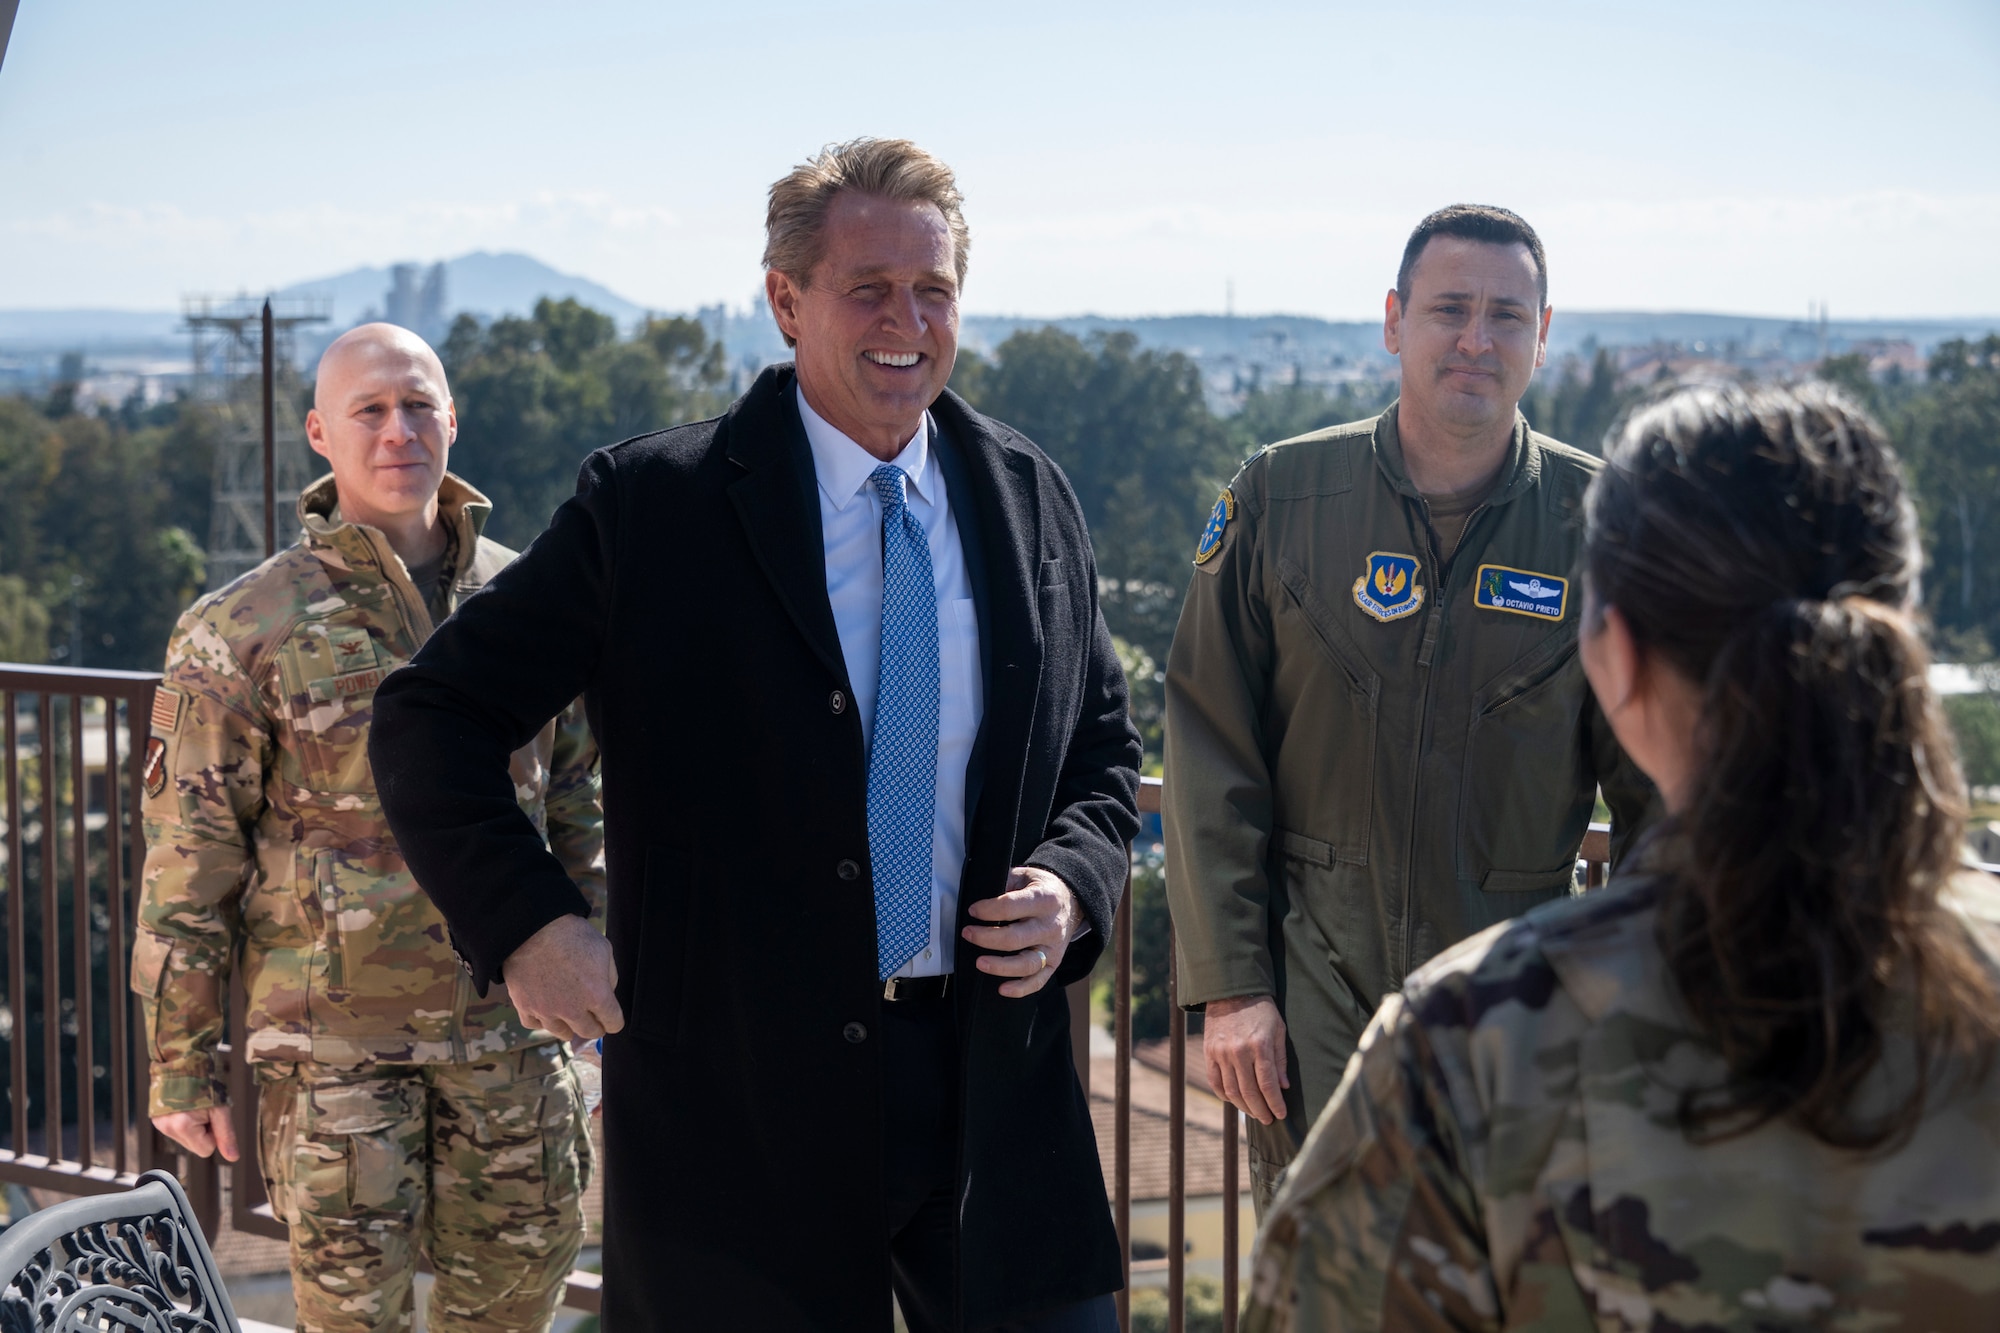 U.S. Ambassador Jeffry Flake, U.S. Ambassador to Türkiye, left, walks to 1st Lt. Alisa Wagner, 39th Operations Support Squadron Airfield Operations Flight director of operations, during his visit to Incirlik Air Base, Türkiye, Feb 13, 2023. Ambassador Flake visited Incirlik AB to discuss the recent earthquakes that struck central-southern Türkiye on Feb 6, 2023, and see the humanitarian support efforts first-hand. As Ambassador to Türkiye, Flake holds the highest civilian position as The Chief of Mission, and impacts the communication and resources of U.S. personnel, advancing the U.S. foreign policy goals. As a fellow NATO ally, the U.S. Government mobilized personnel to assist Türkiye in their response efforts. (U.S. Air Force photo by Senior Airman David D. McLoney)